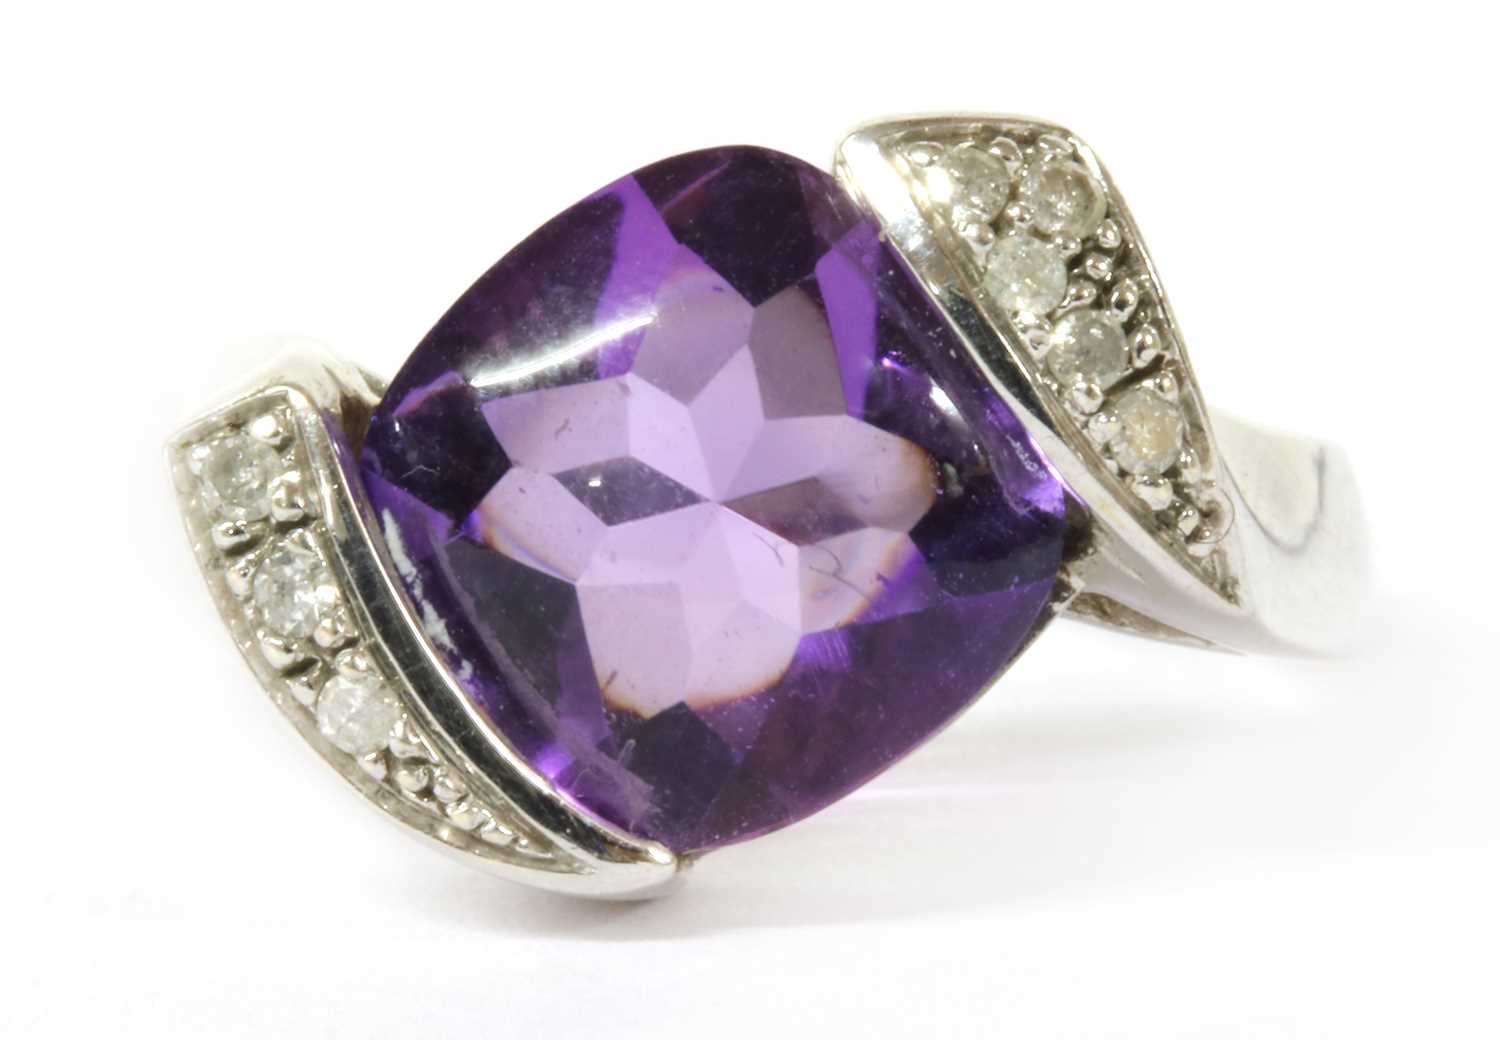 Lot 291 - A white gold amethyst and diamond ring